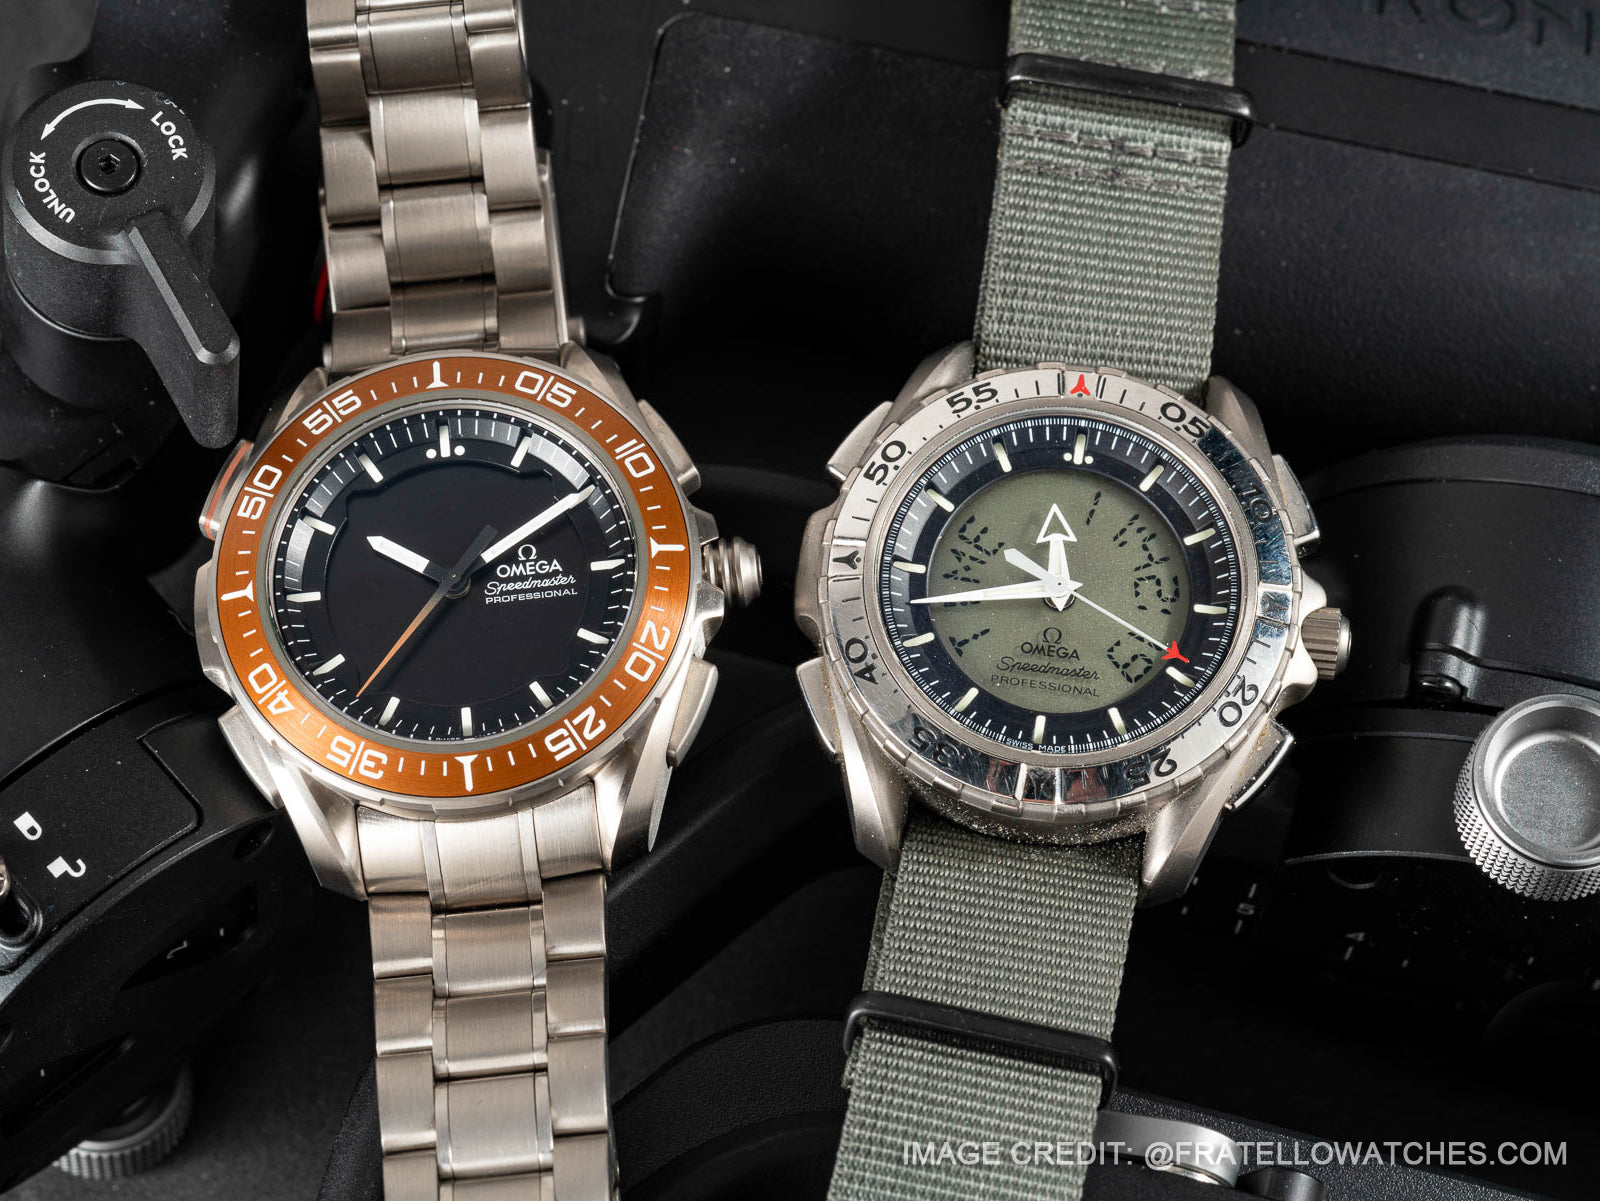 Omega Speedmaster X 33 Marstimer compare the first Omega X 33 in 1998